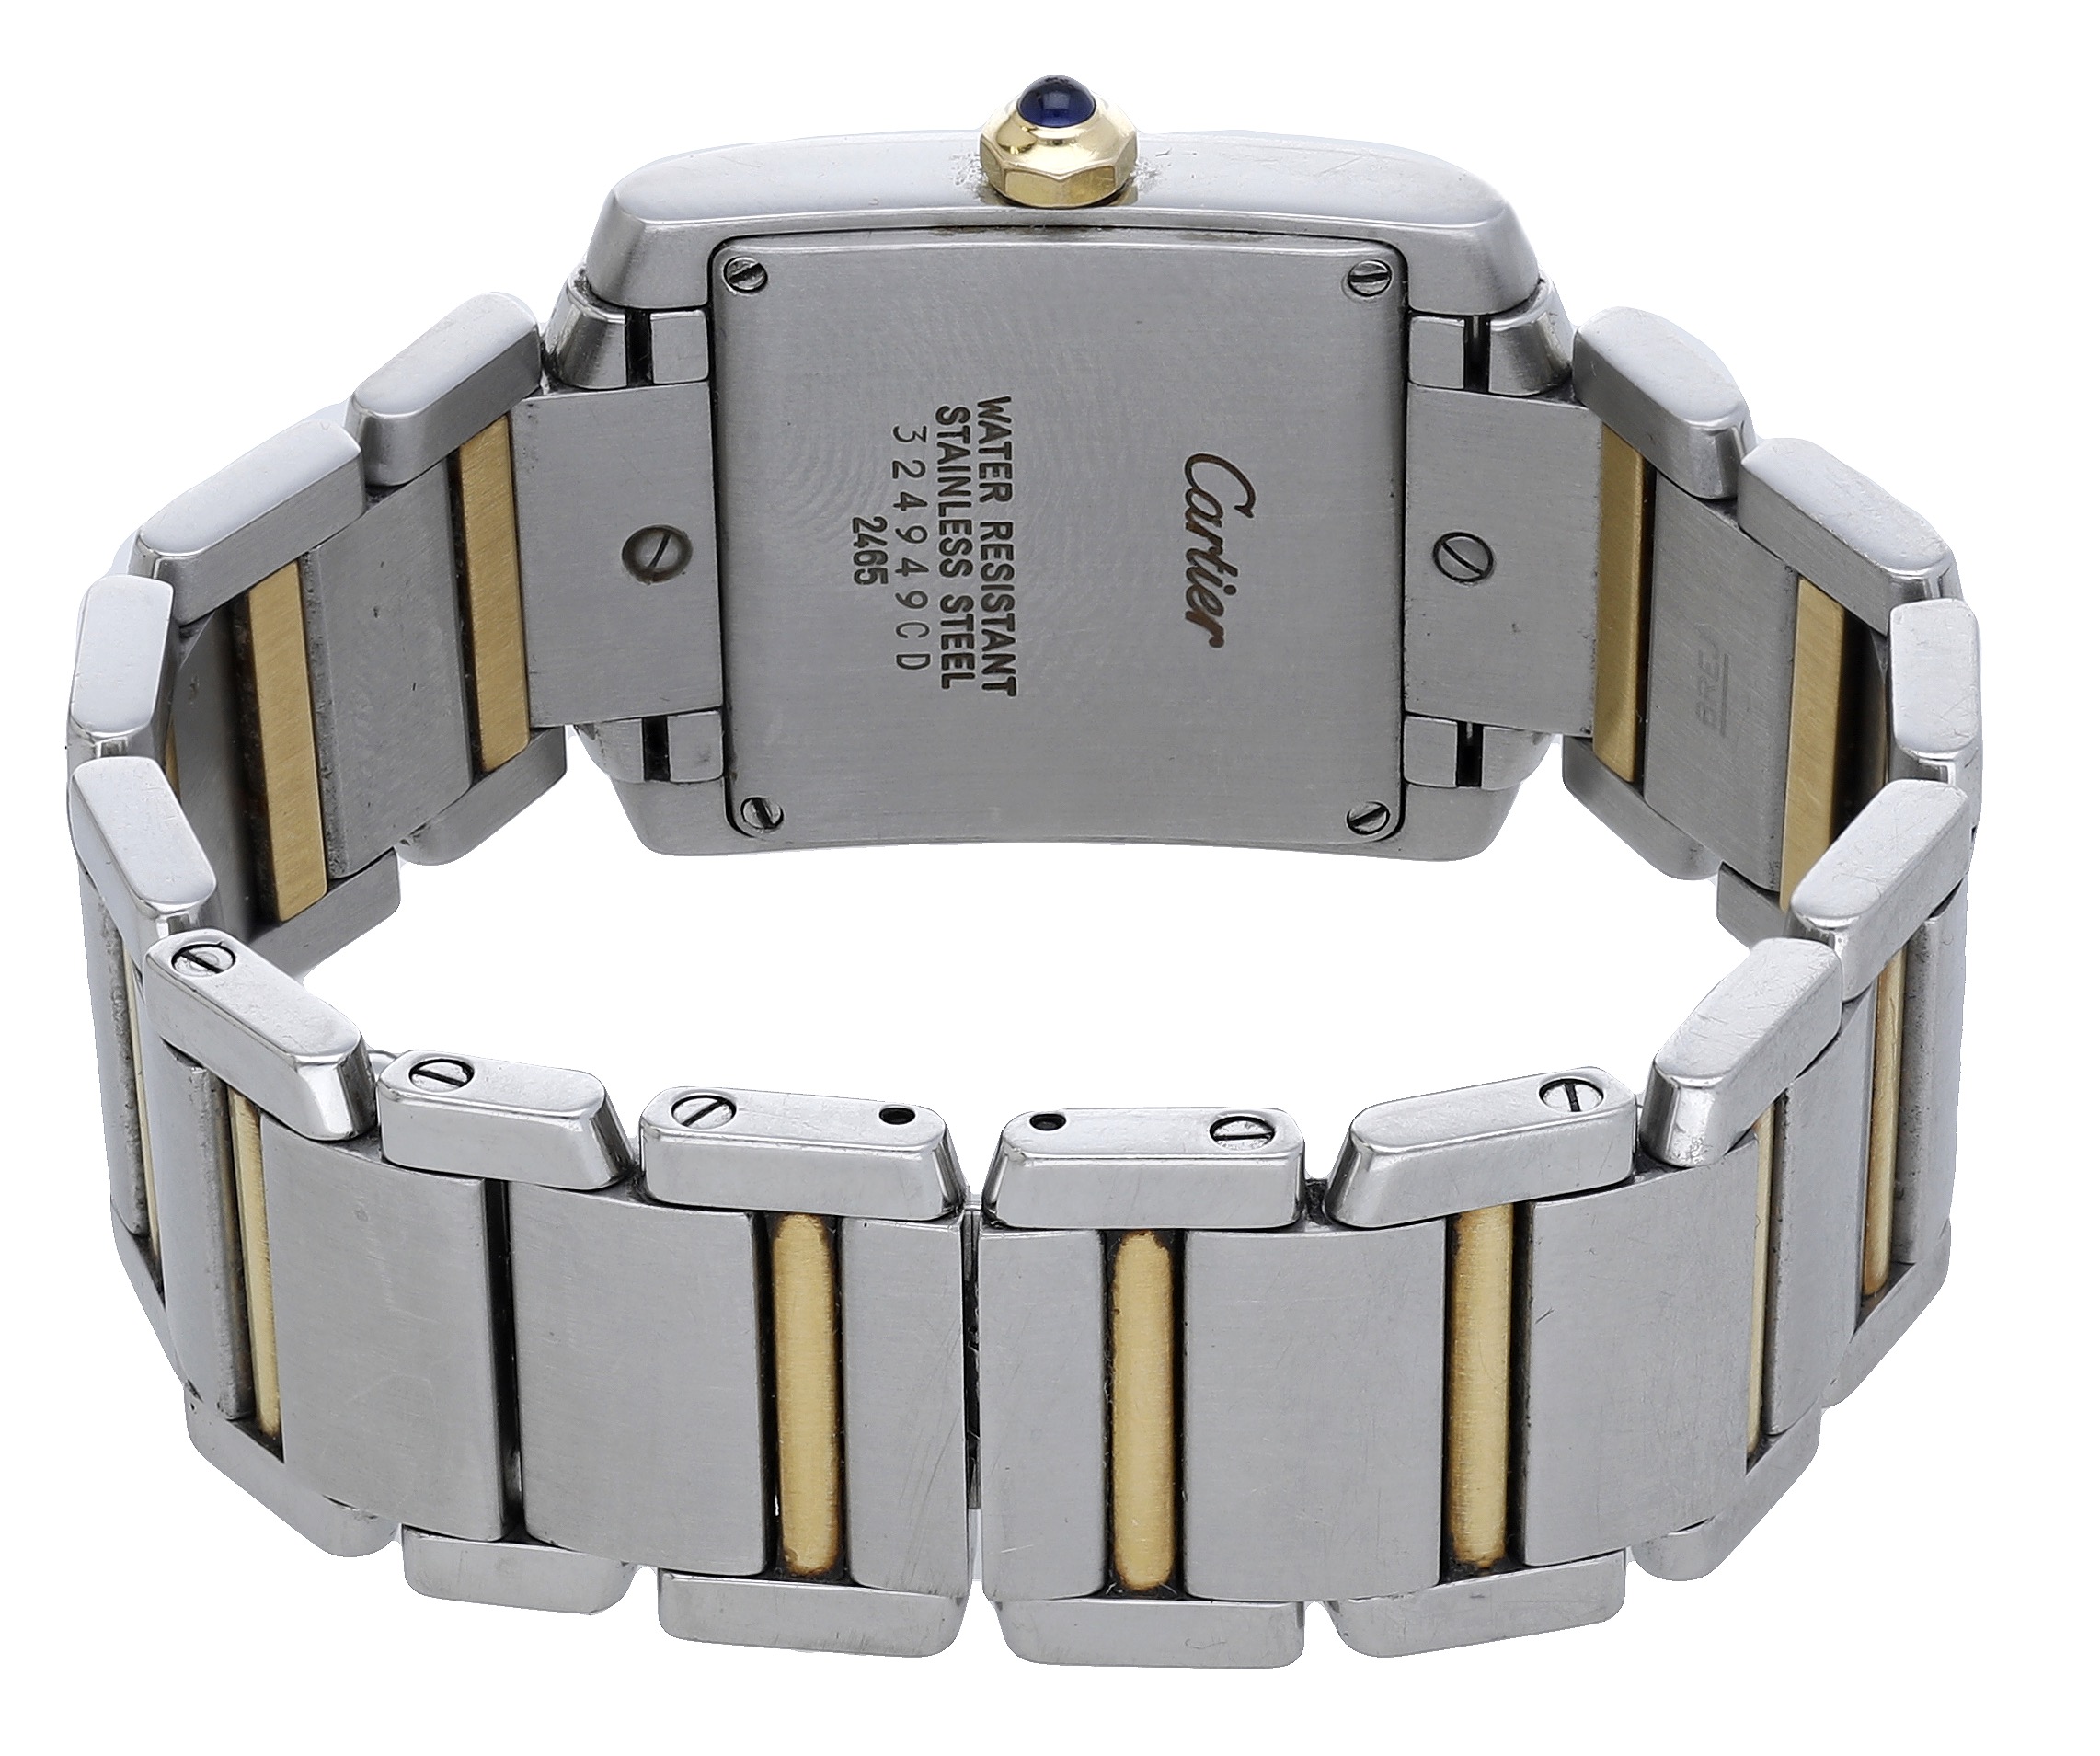 Cartier. A lady's steel and gold rectangular wristwatch with bracelet, Ref. 2465, Tank Franc... - Image 2 of 3